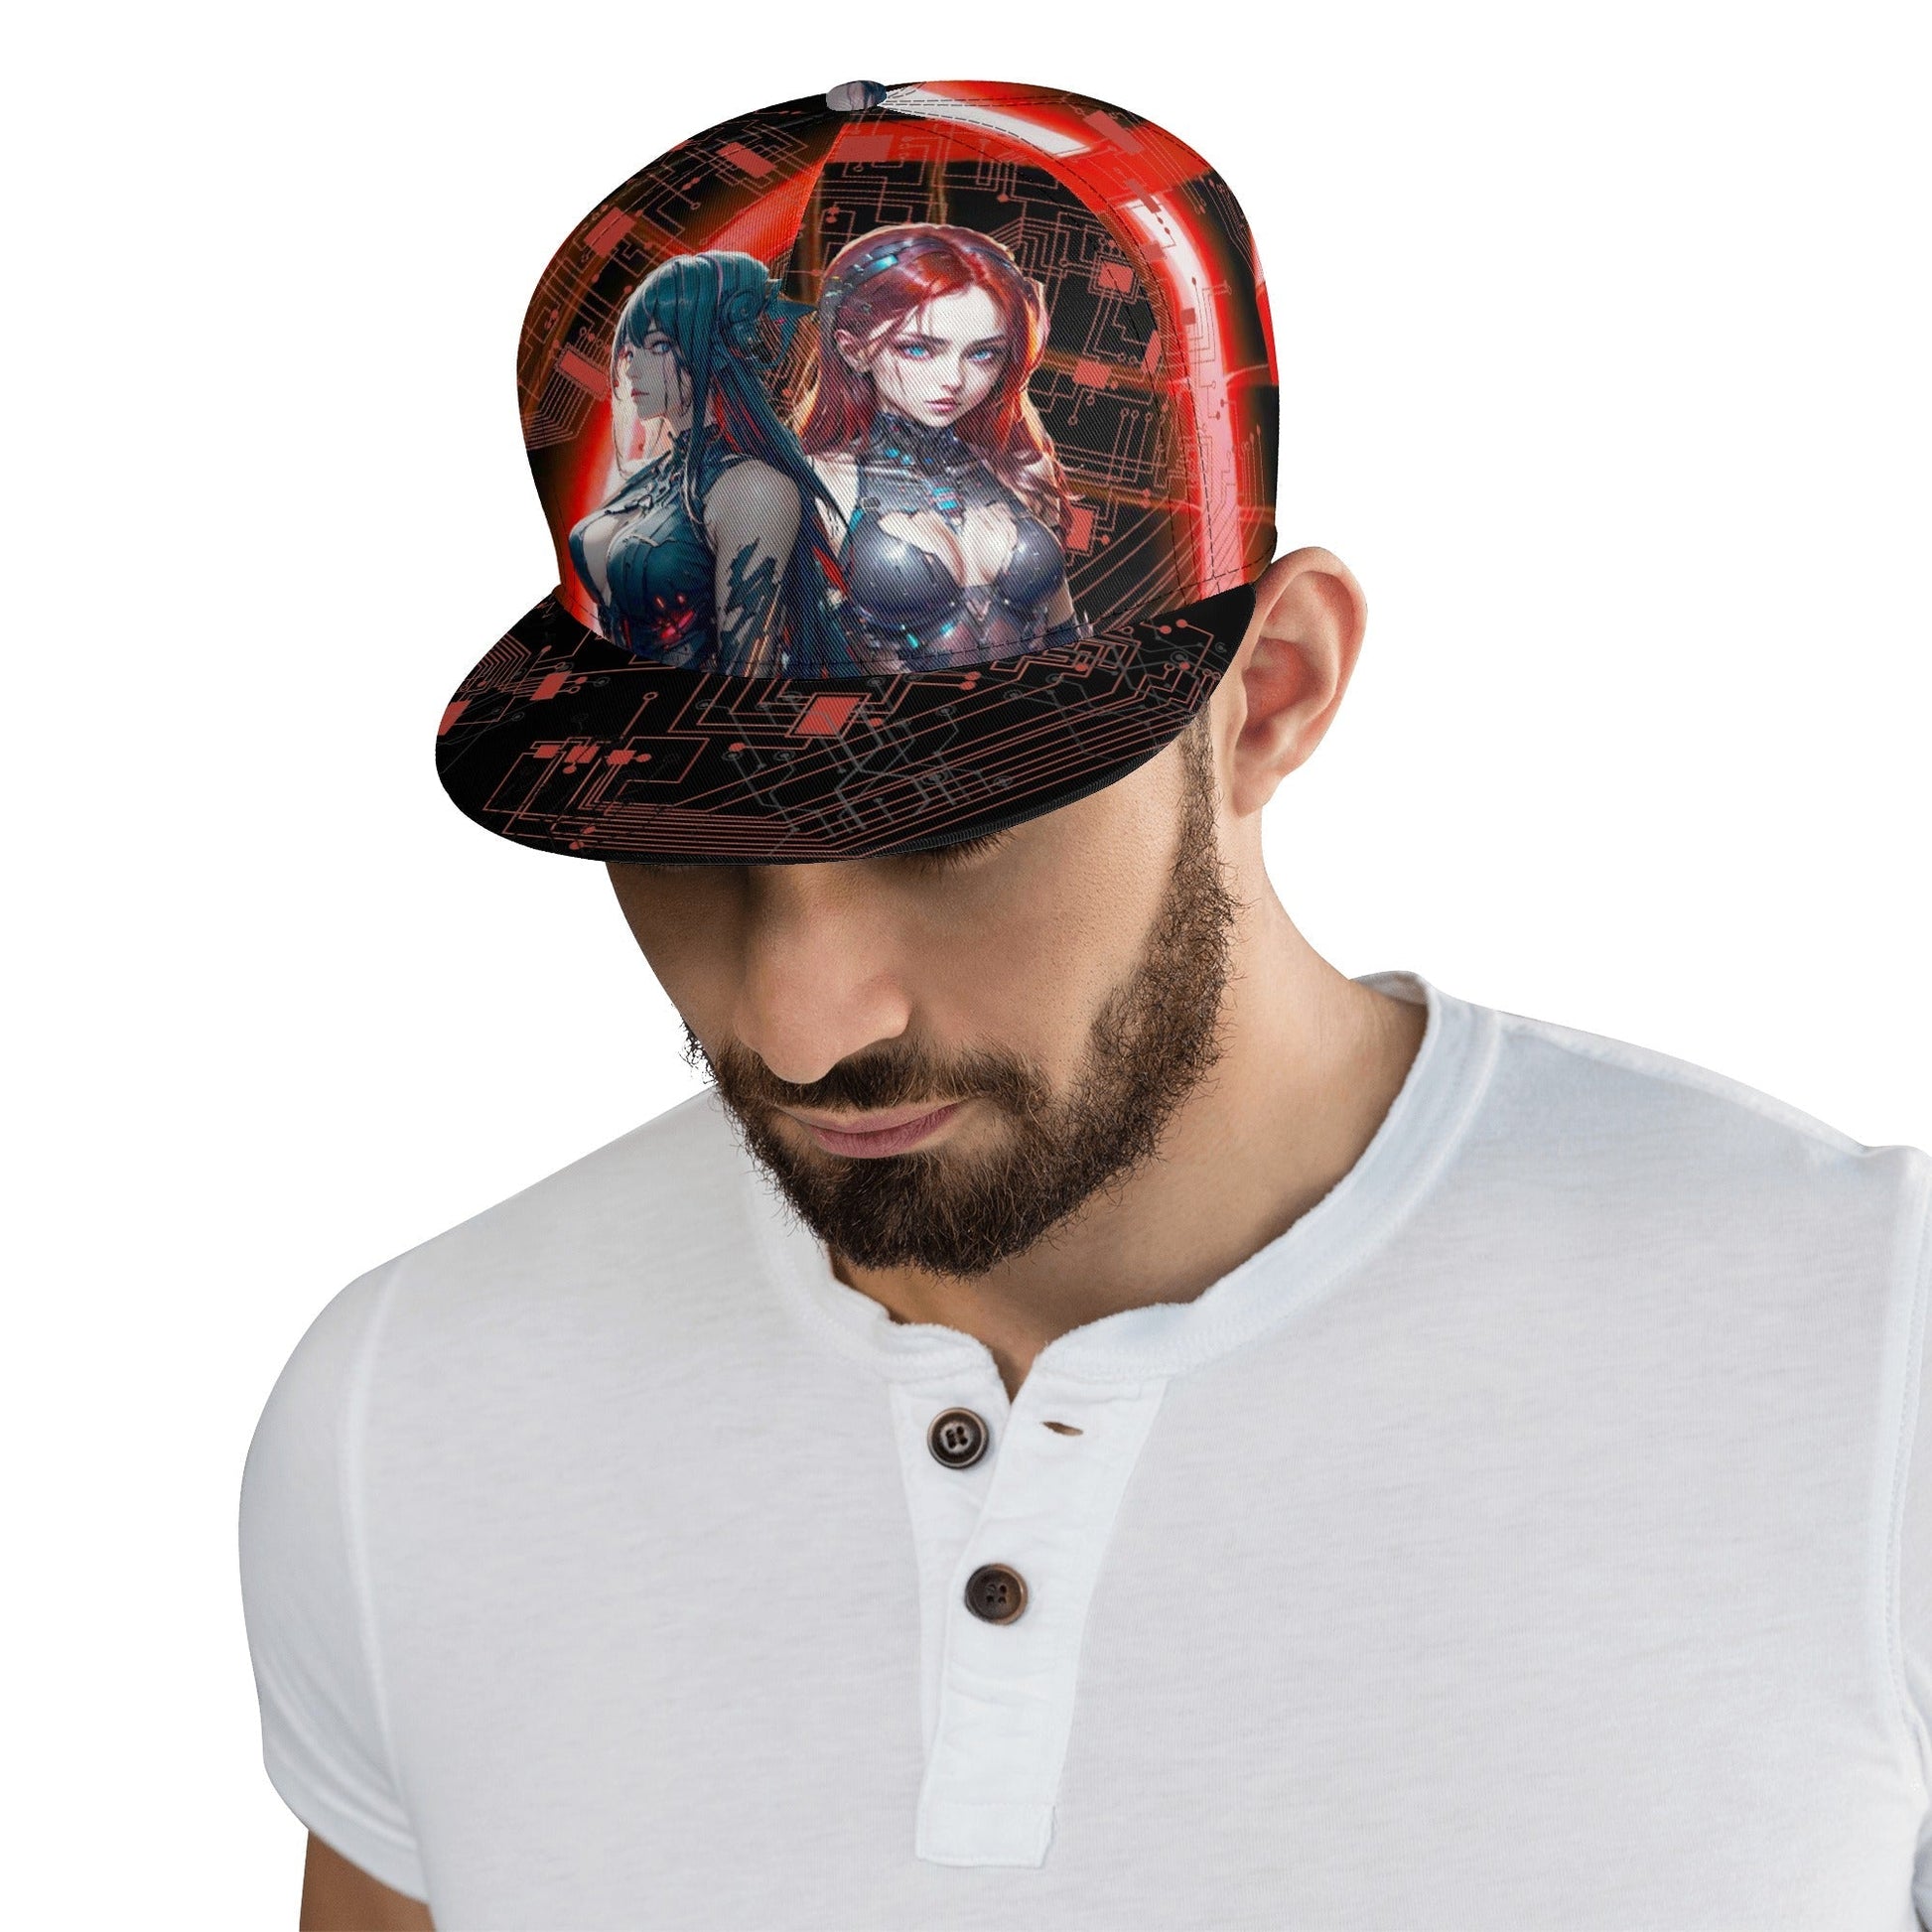 Stand out  with the  Error 404 Hip-hop Caps  available at Hey Nugget. Grab yours today!